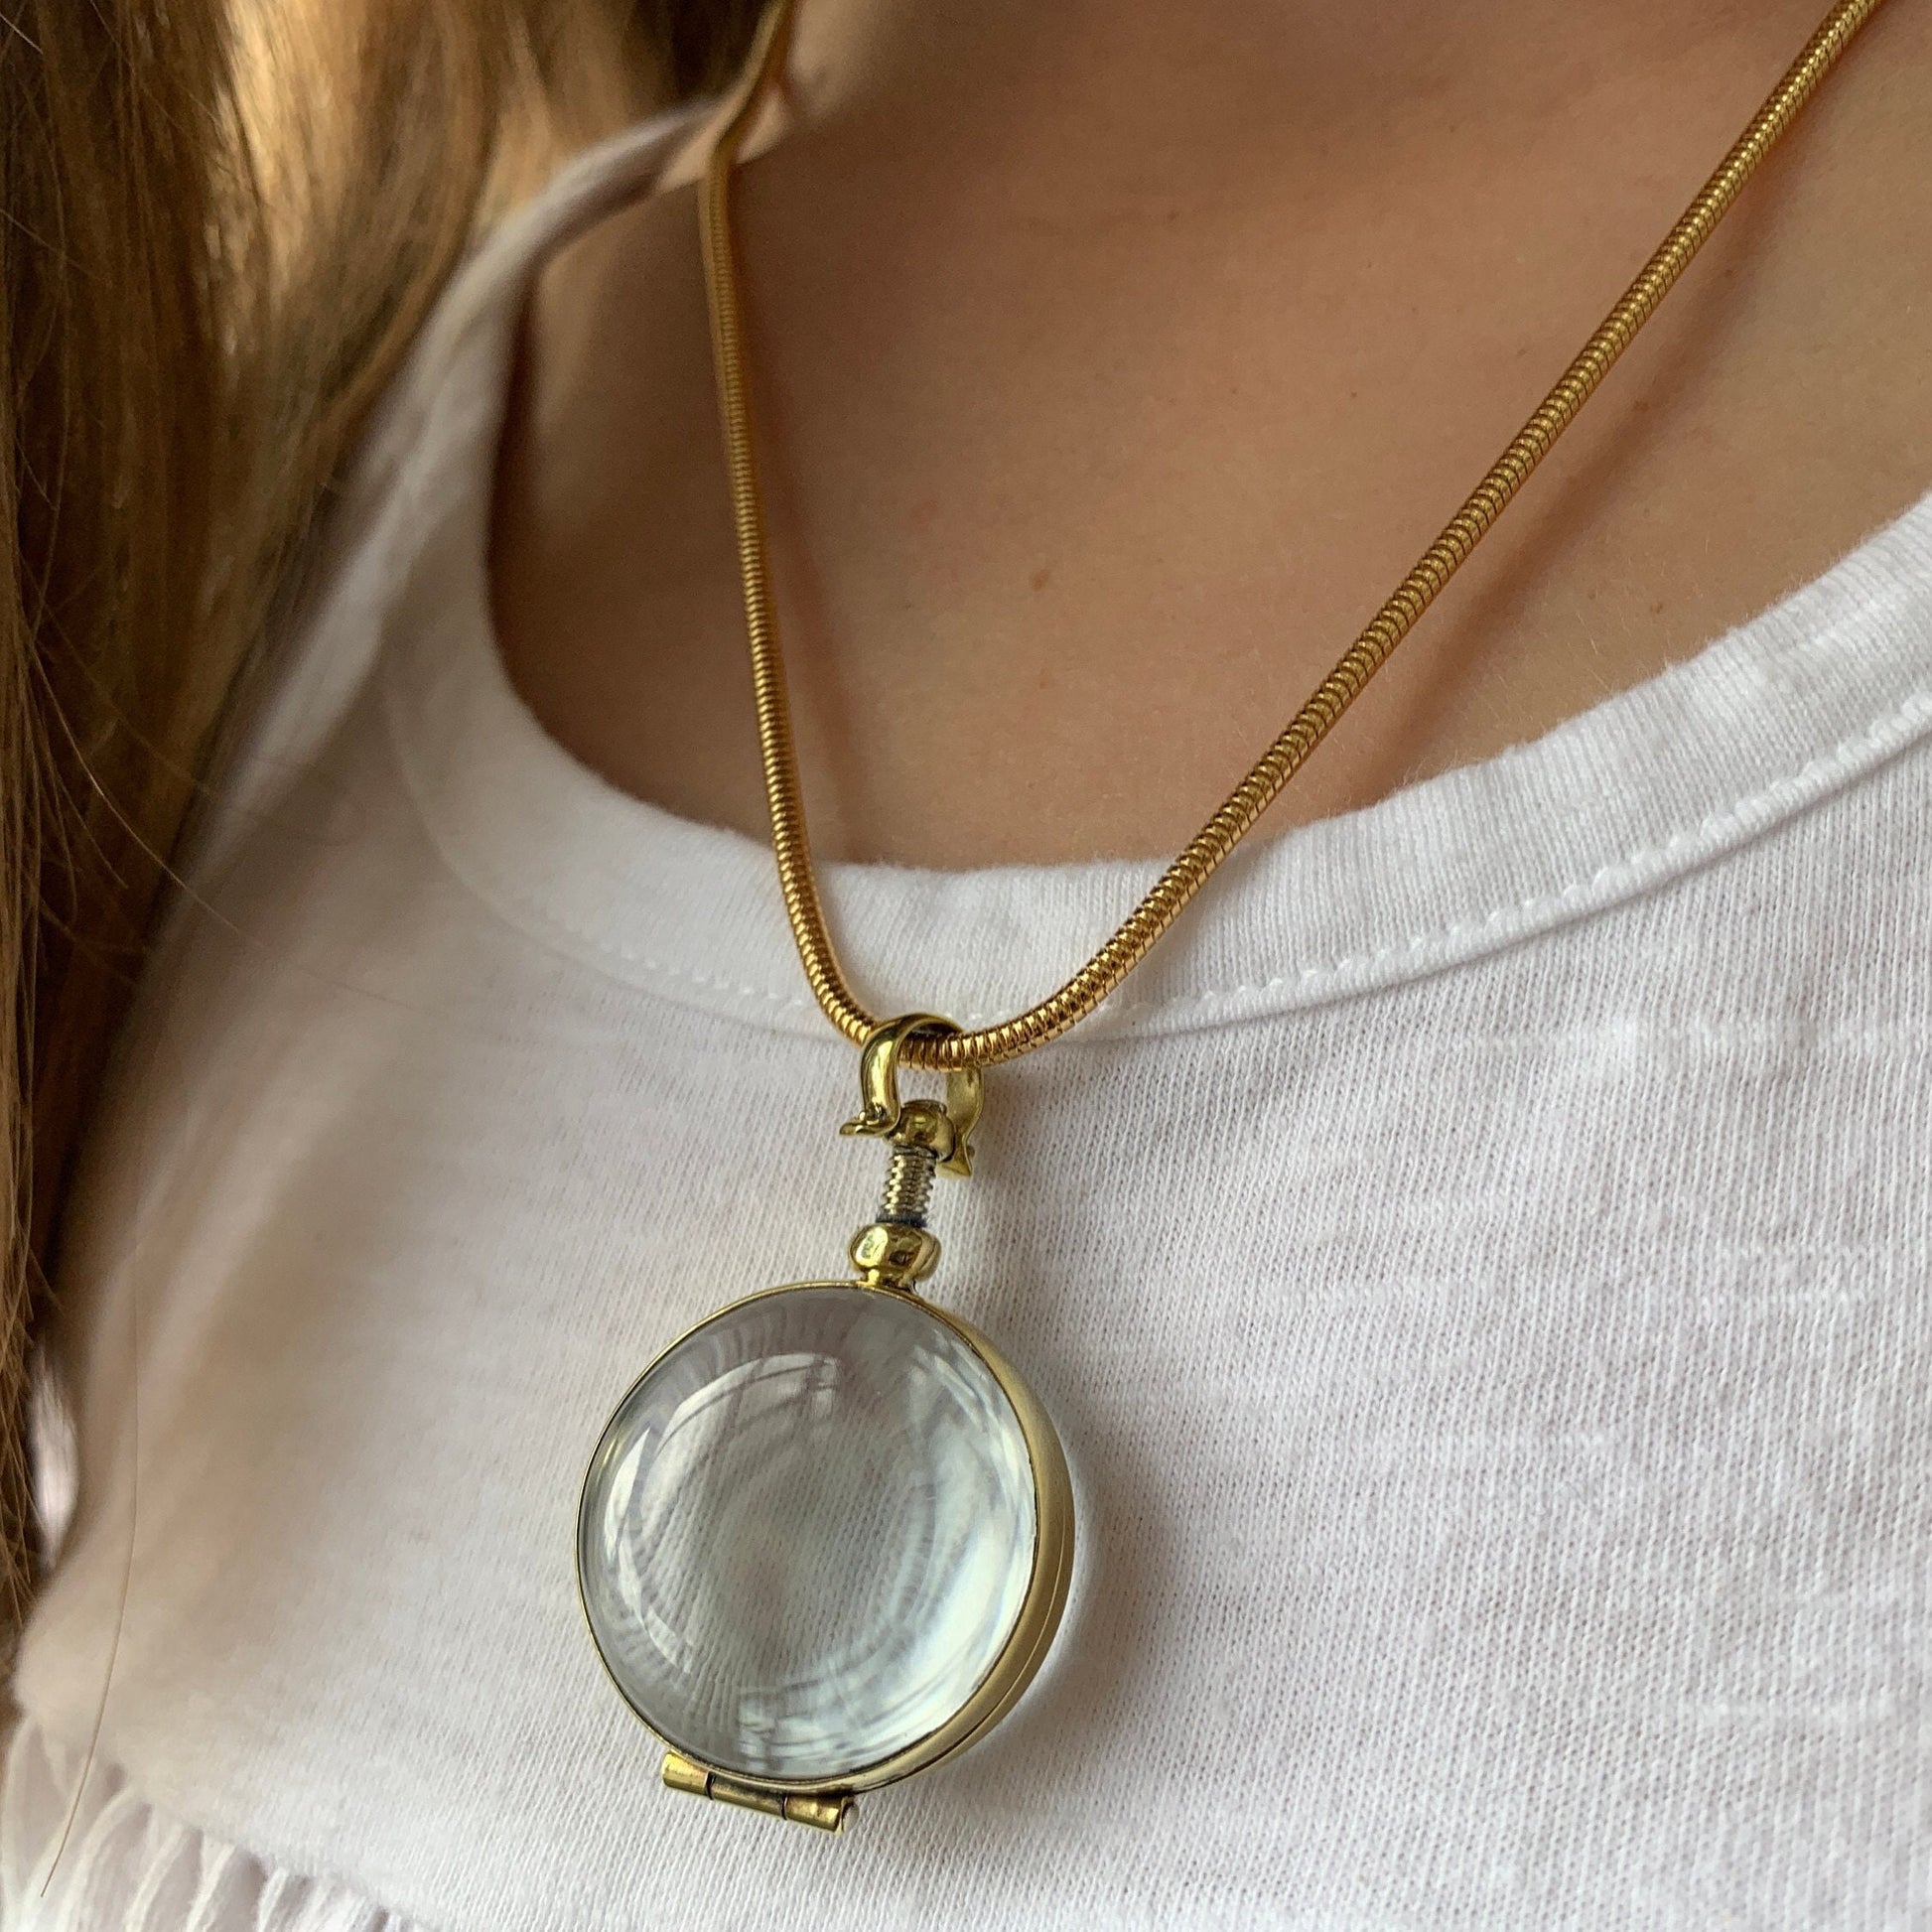 Great value gold locket necklace - Choose your shape Choose your chain gold photo locket Jewelry gift for her, add your photo locket